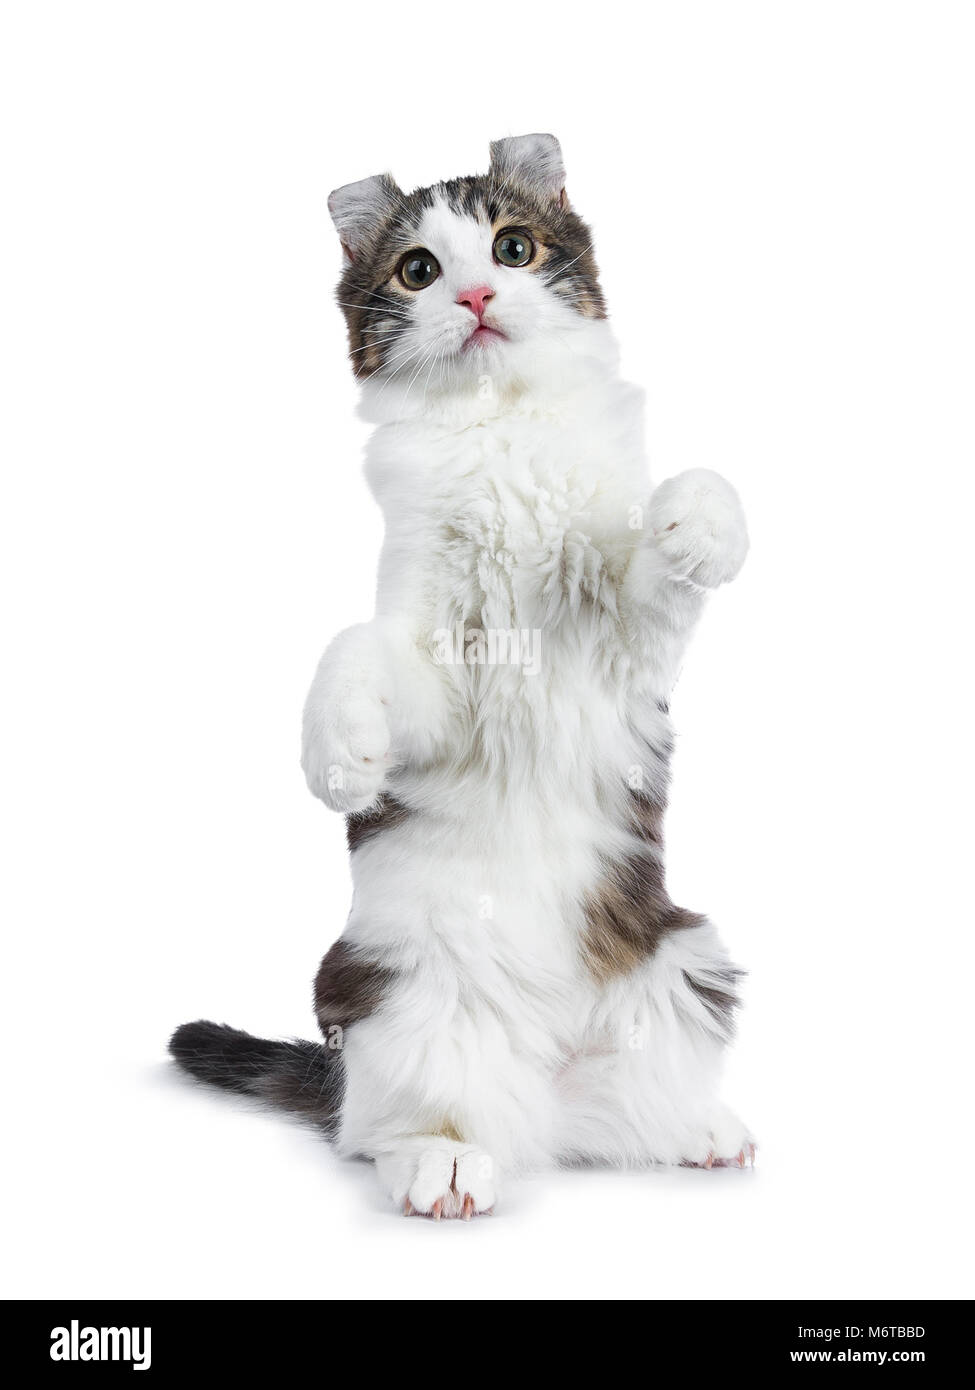 Black tabby with white American Curl cat / kitten standing on back paws like meerkat looking in to the lens isolated on white background. Stock Photo